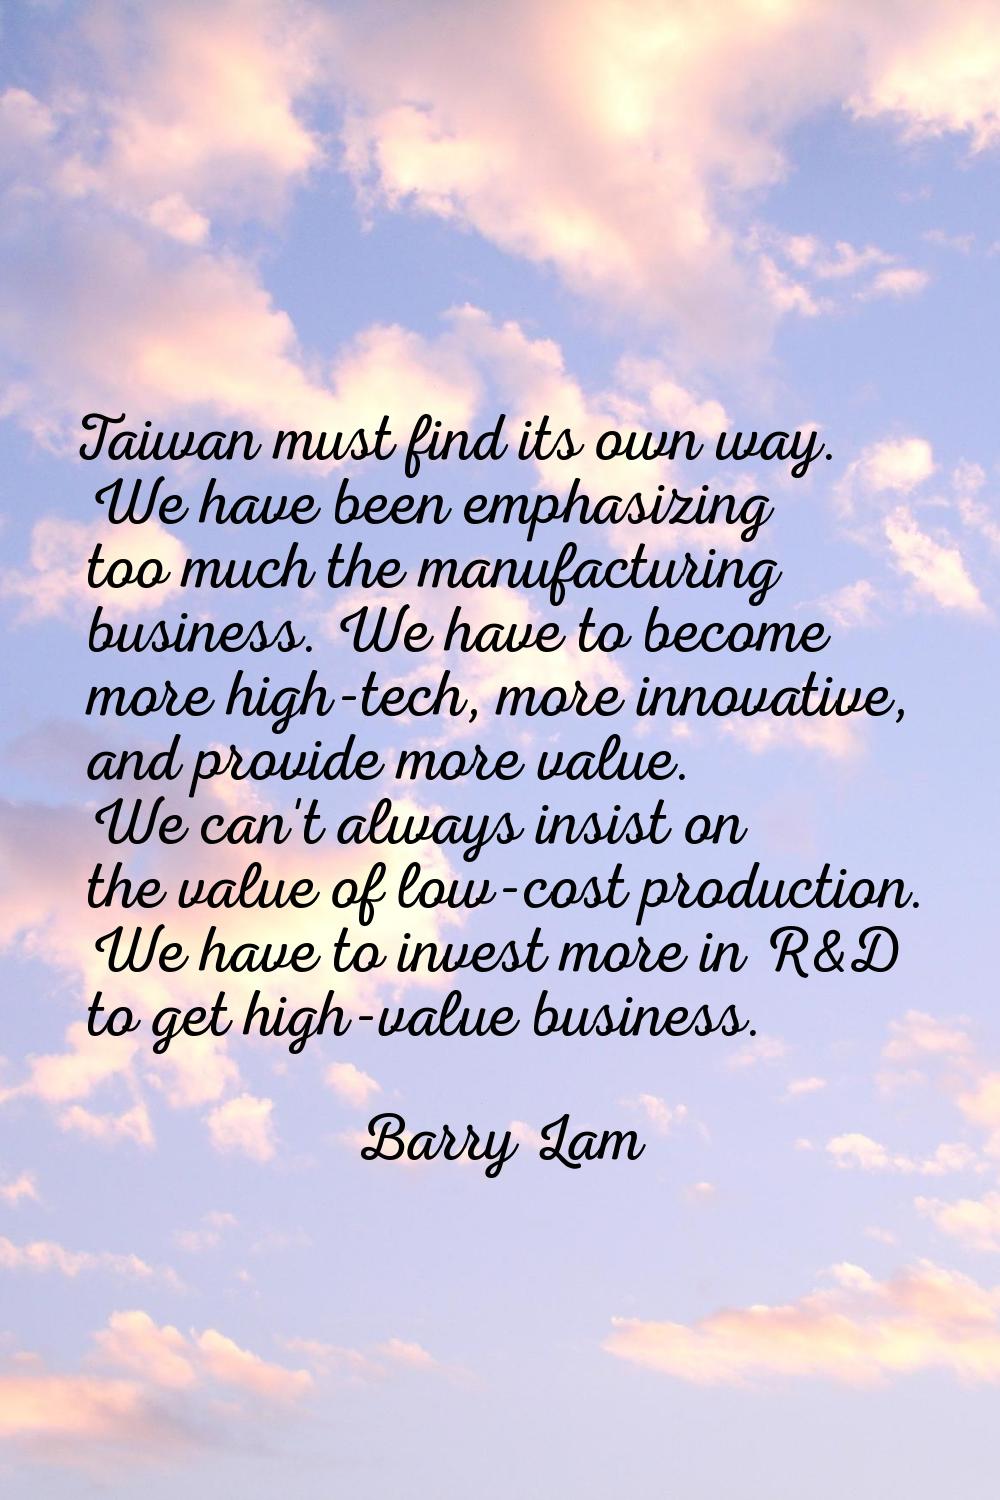 Taiwan must find its own way. We have been emphasizing too much the manufacturing business. We have